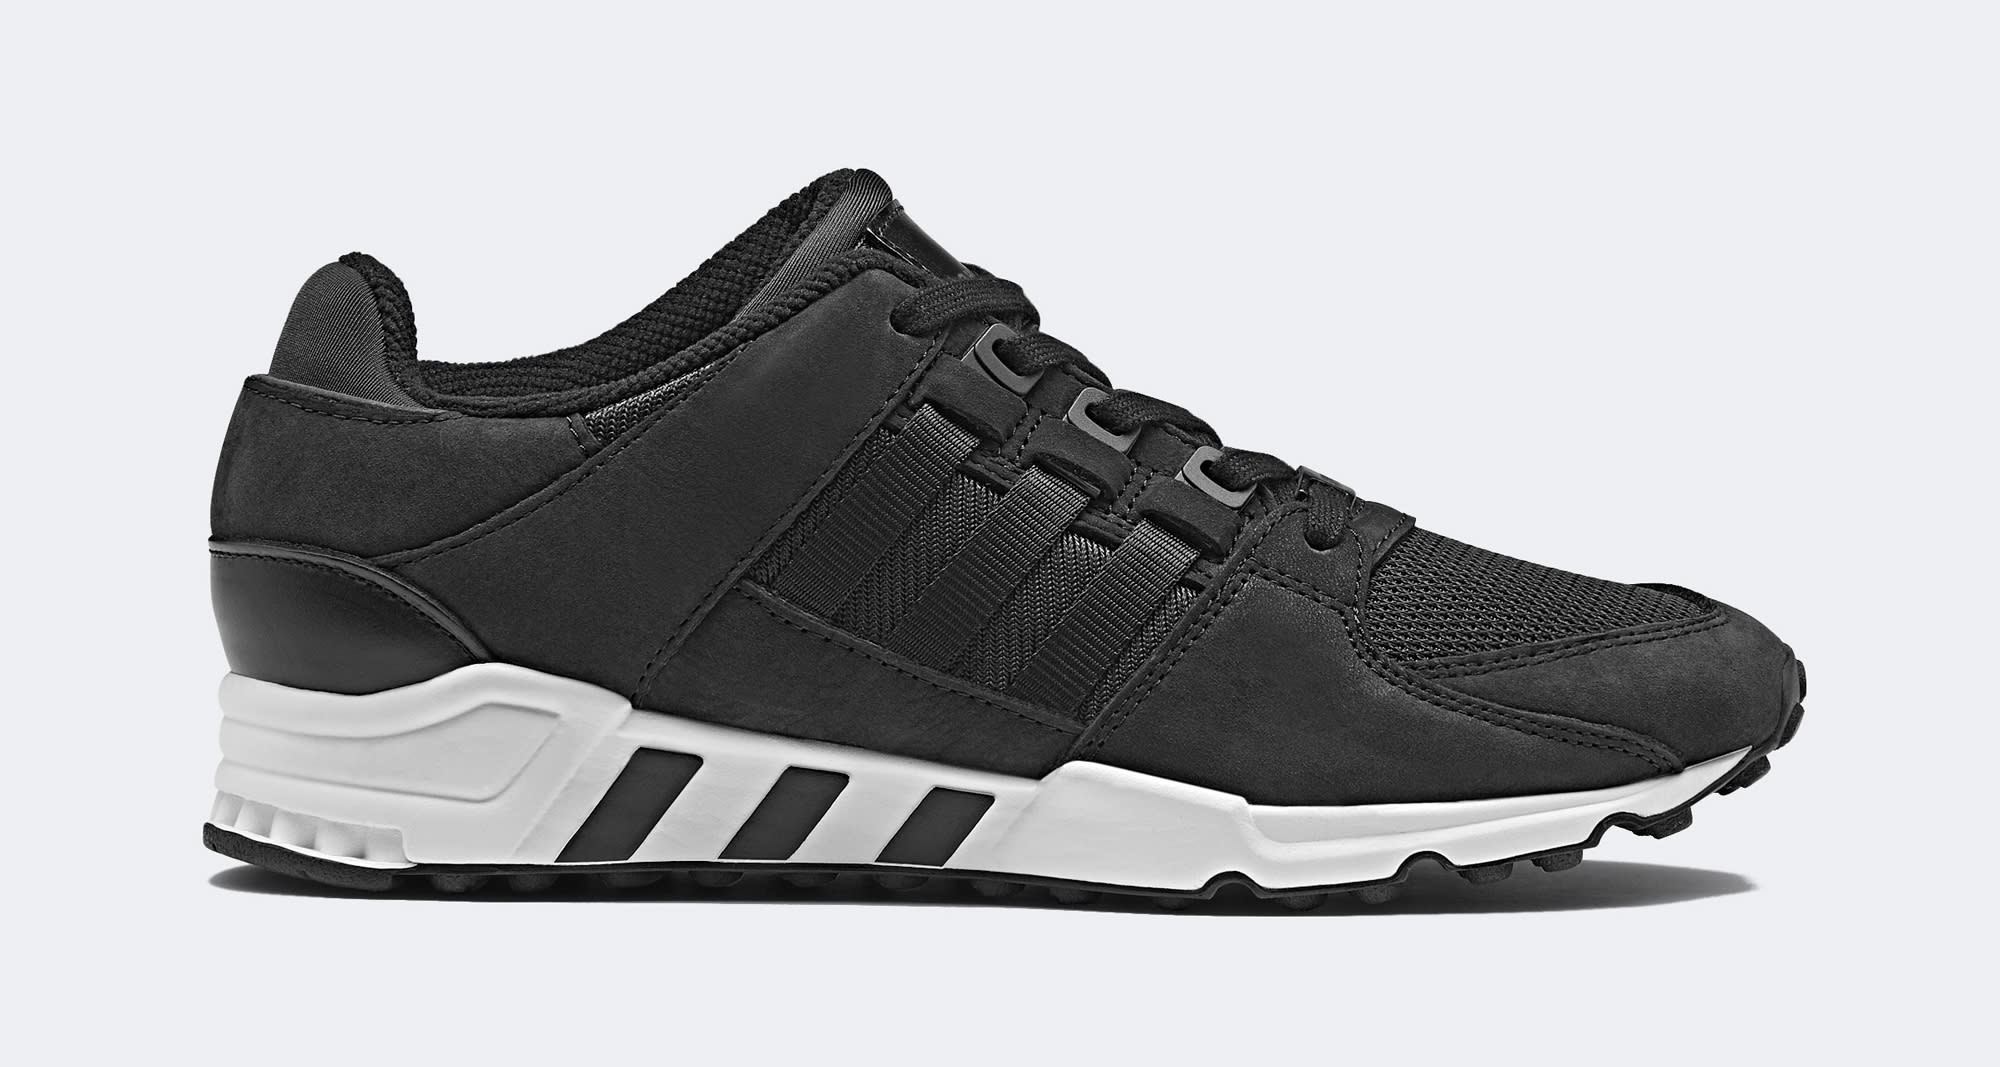 Adidas EQT Milled Leather Pack 6